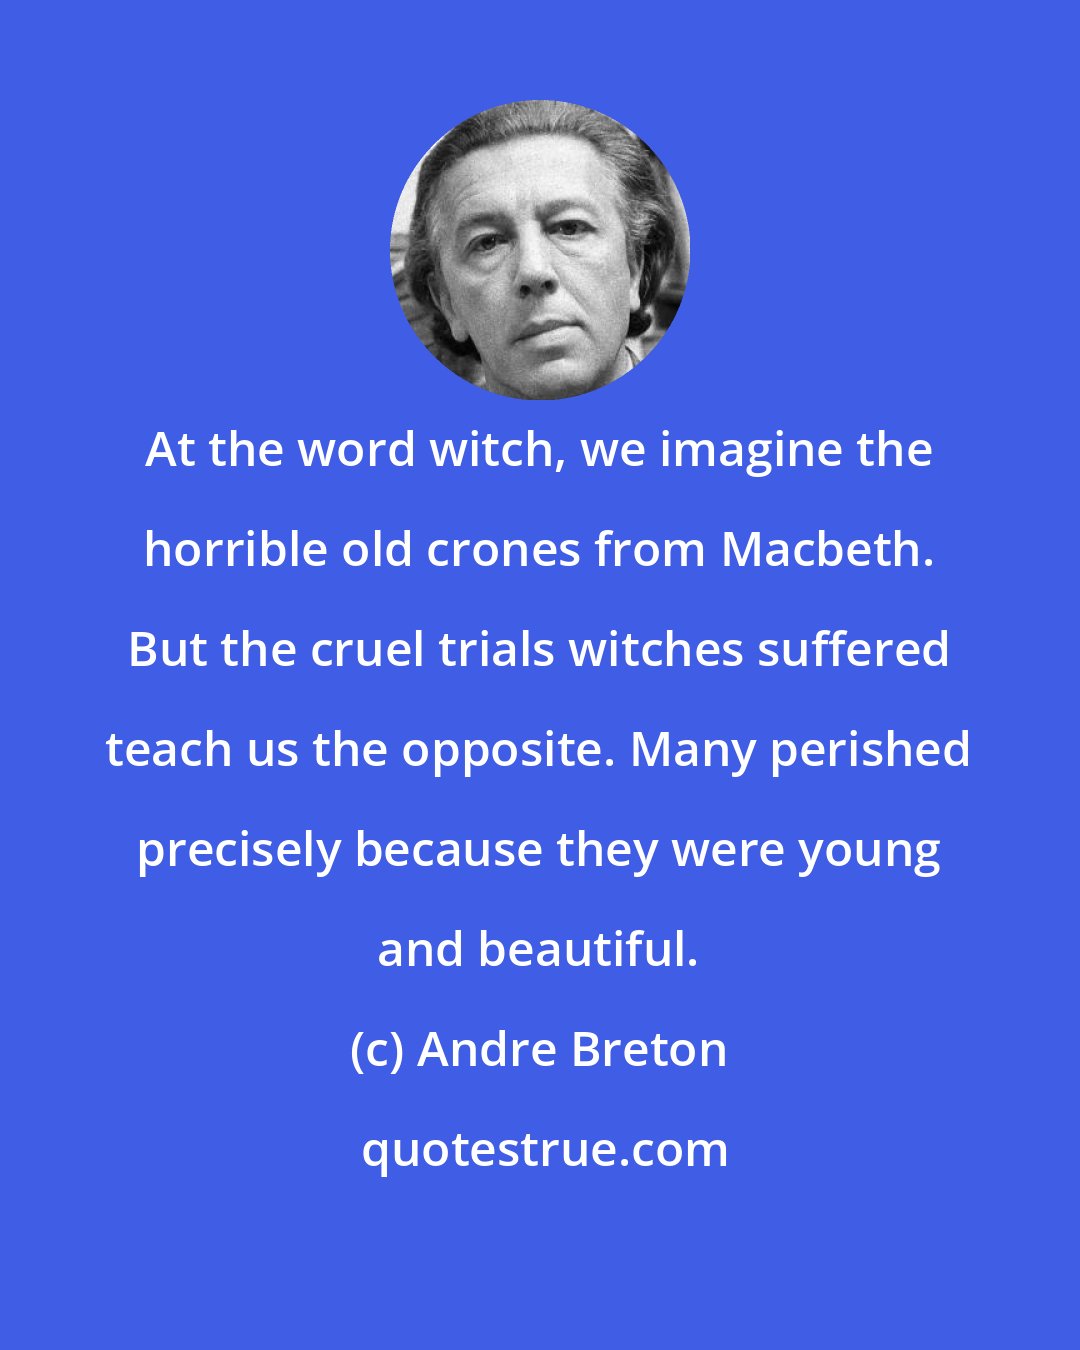 Andre Breton: At the word witch, we imagine the horrible old crones from Macbeth. But the cruel trials witches suffered teach us the opposite. Many perished precisely because they were young and beautiful.